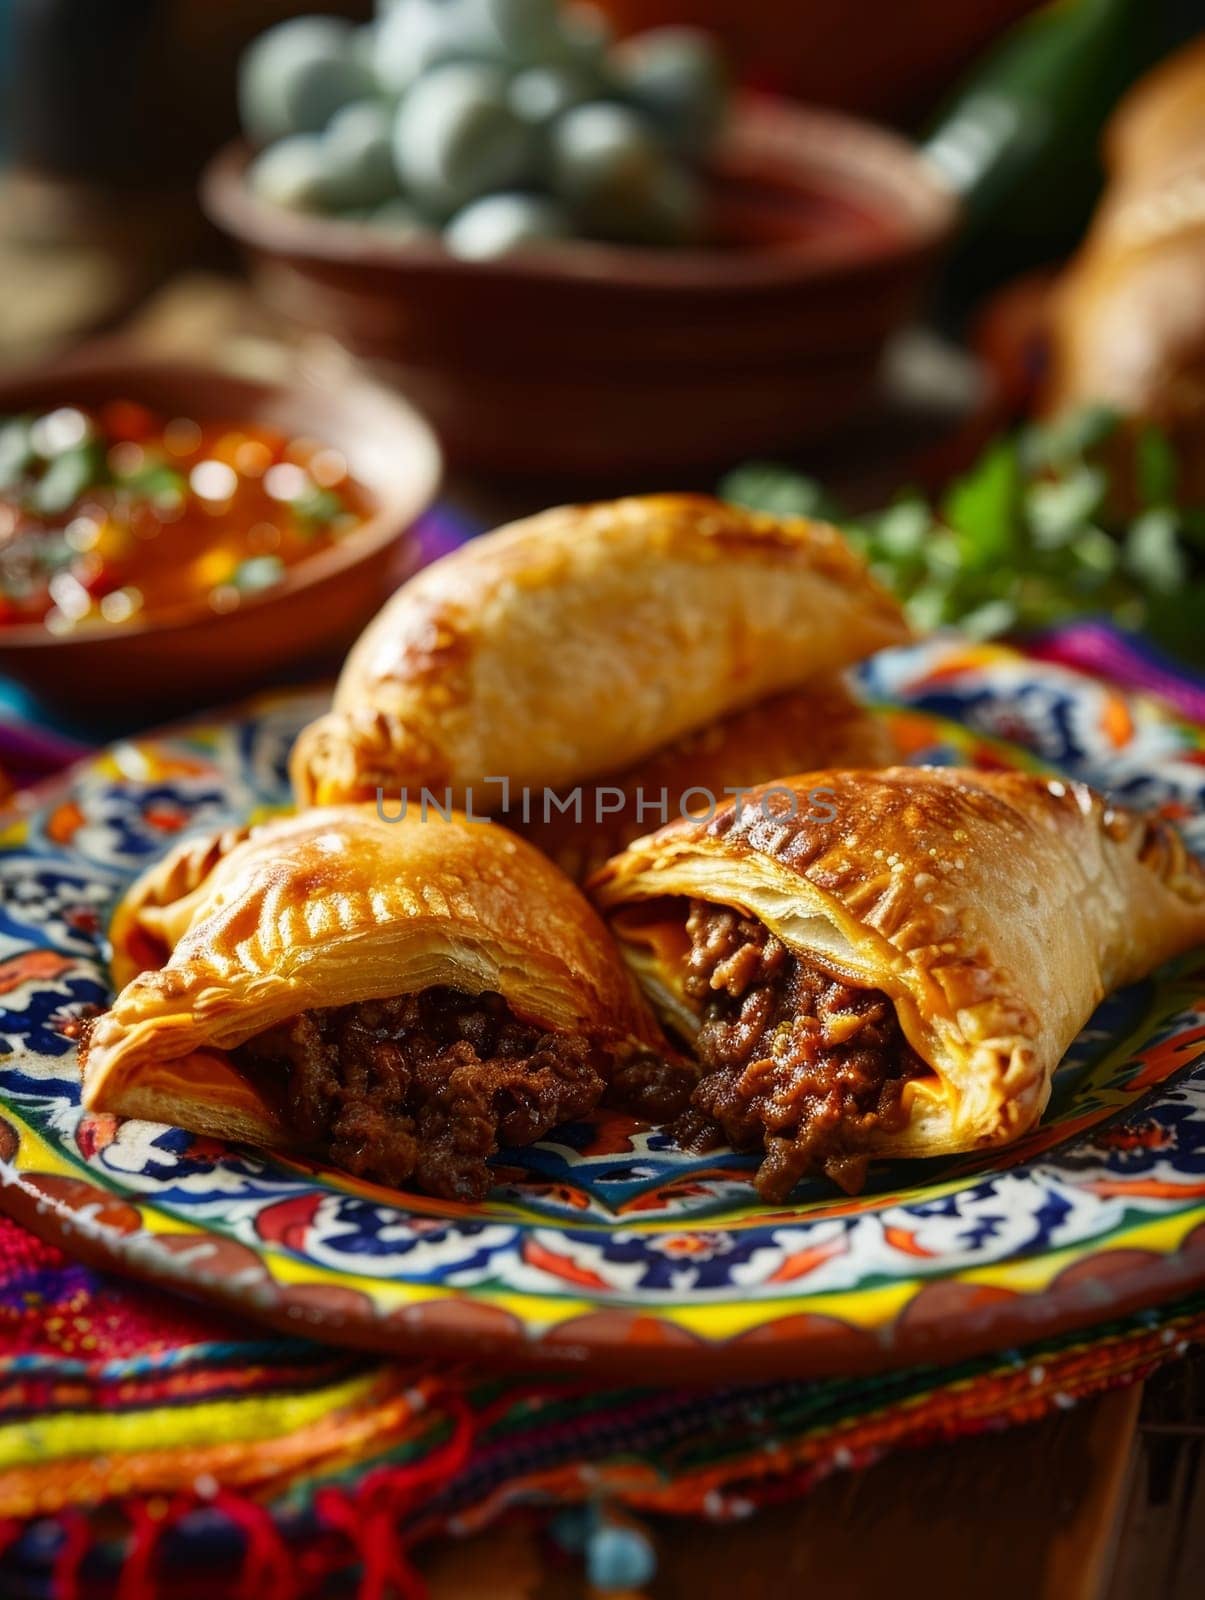 Authentic Bolivian saltenas, baked pastries filled with savory meat and a spicy sauce, beautifully presented on a colorful ceramic plate - mouthwatering representation of the rich culinary traditions. by sfinks